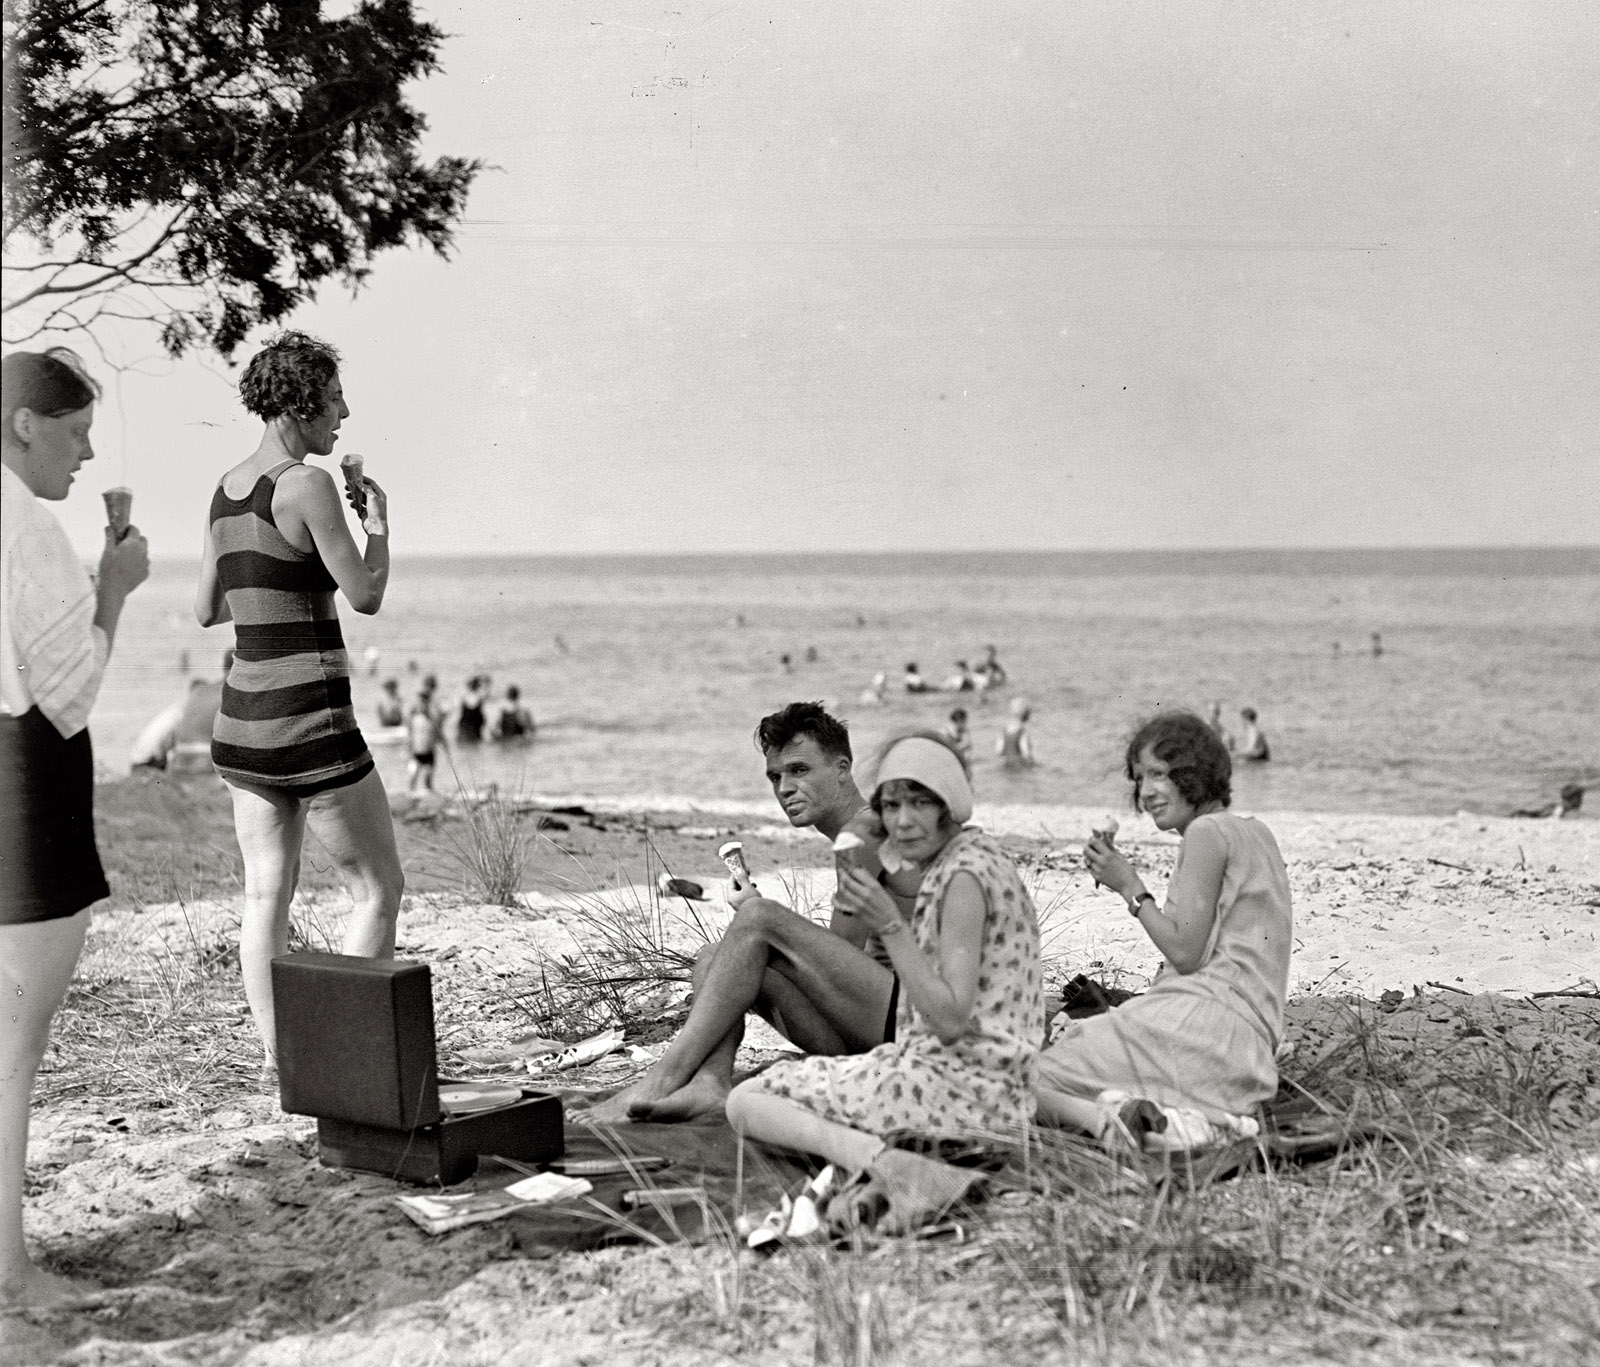 Circa 1928, more fun in the sun at Plum Point near Chesapeake Beach, Maryland. National Photo Company Collection glass negative. View full size.